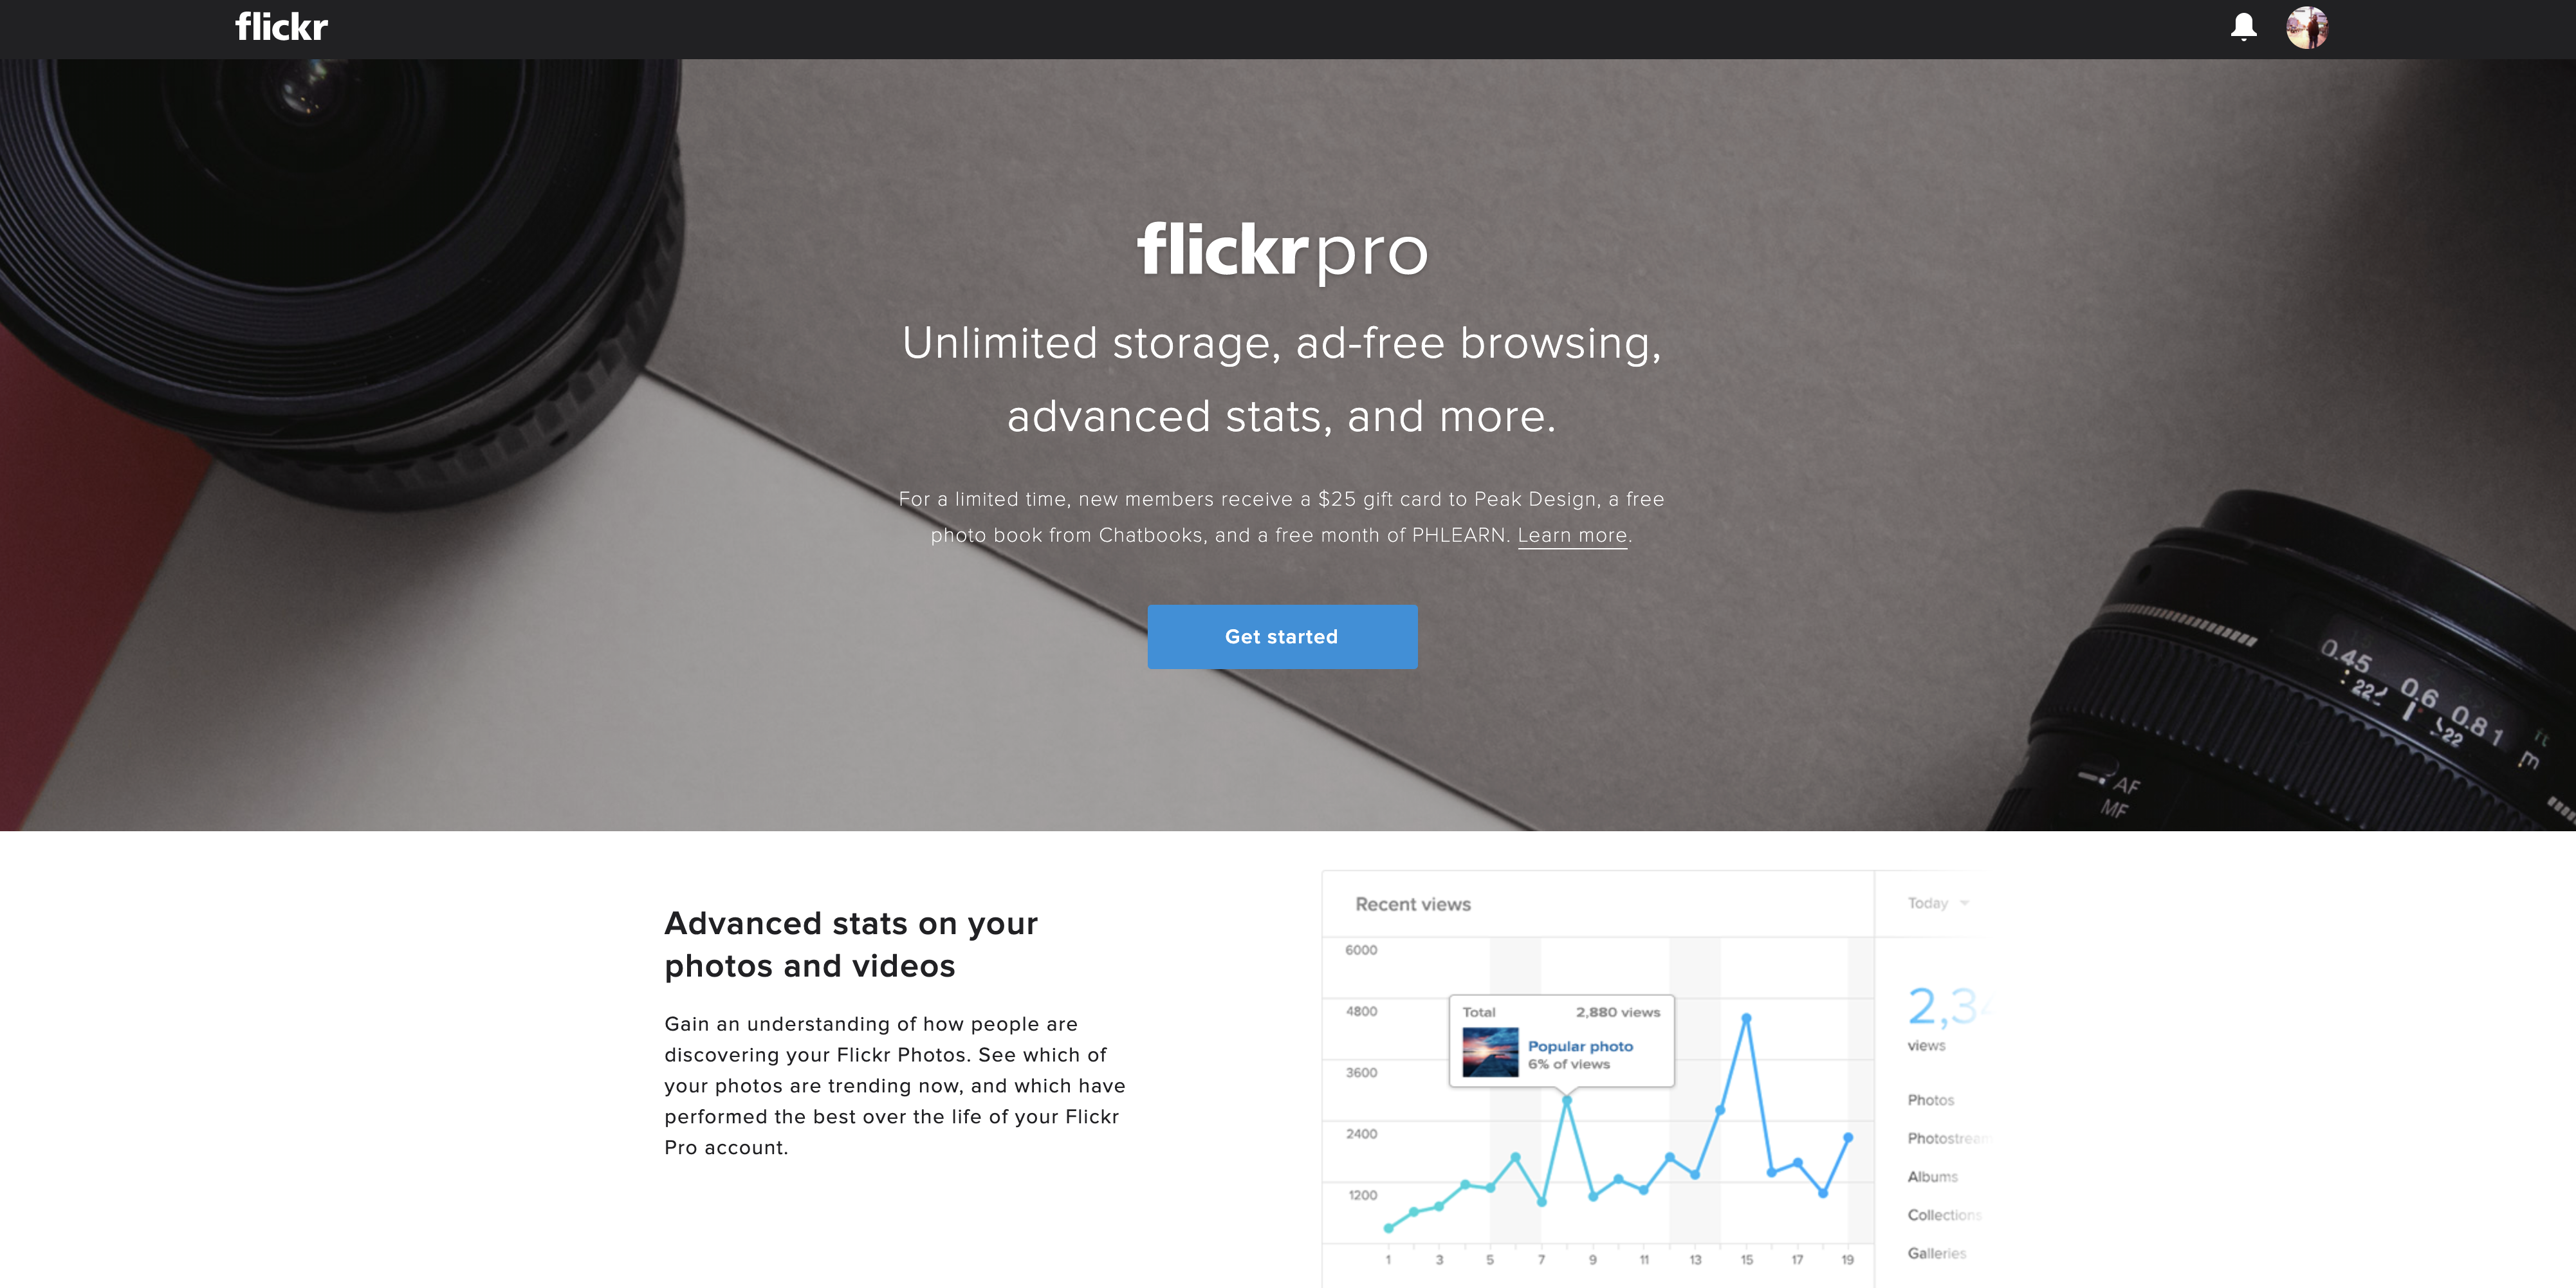 Flickr Needs More Pro Members to Stay Afloat